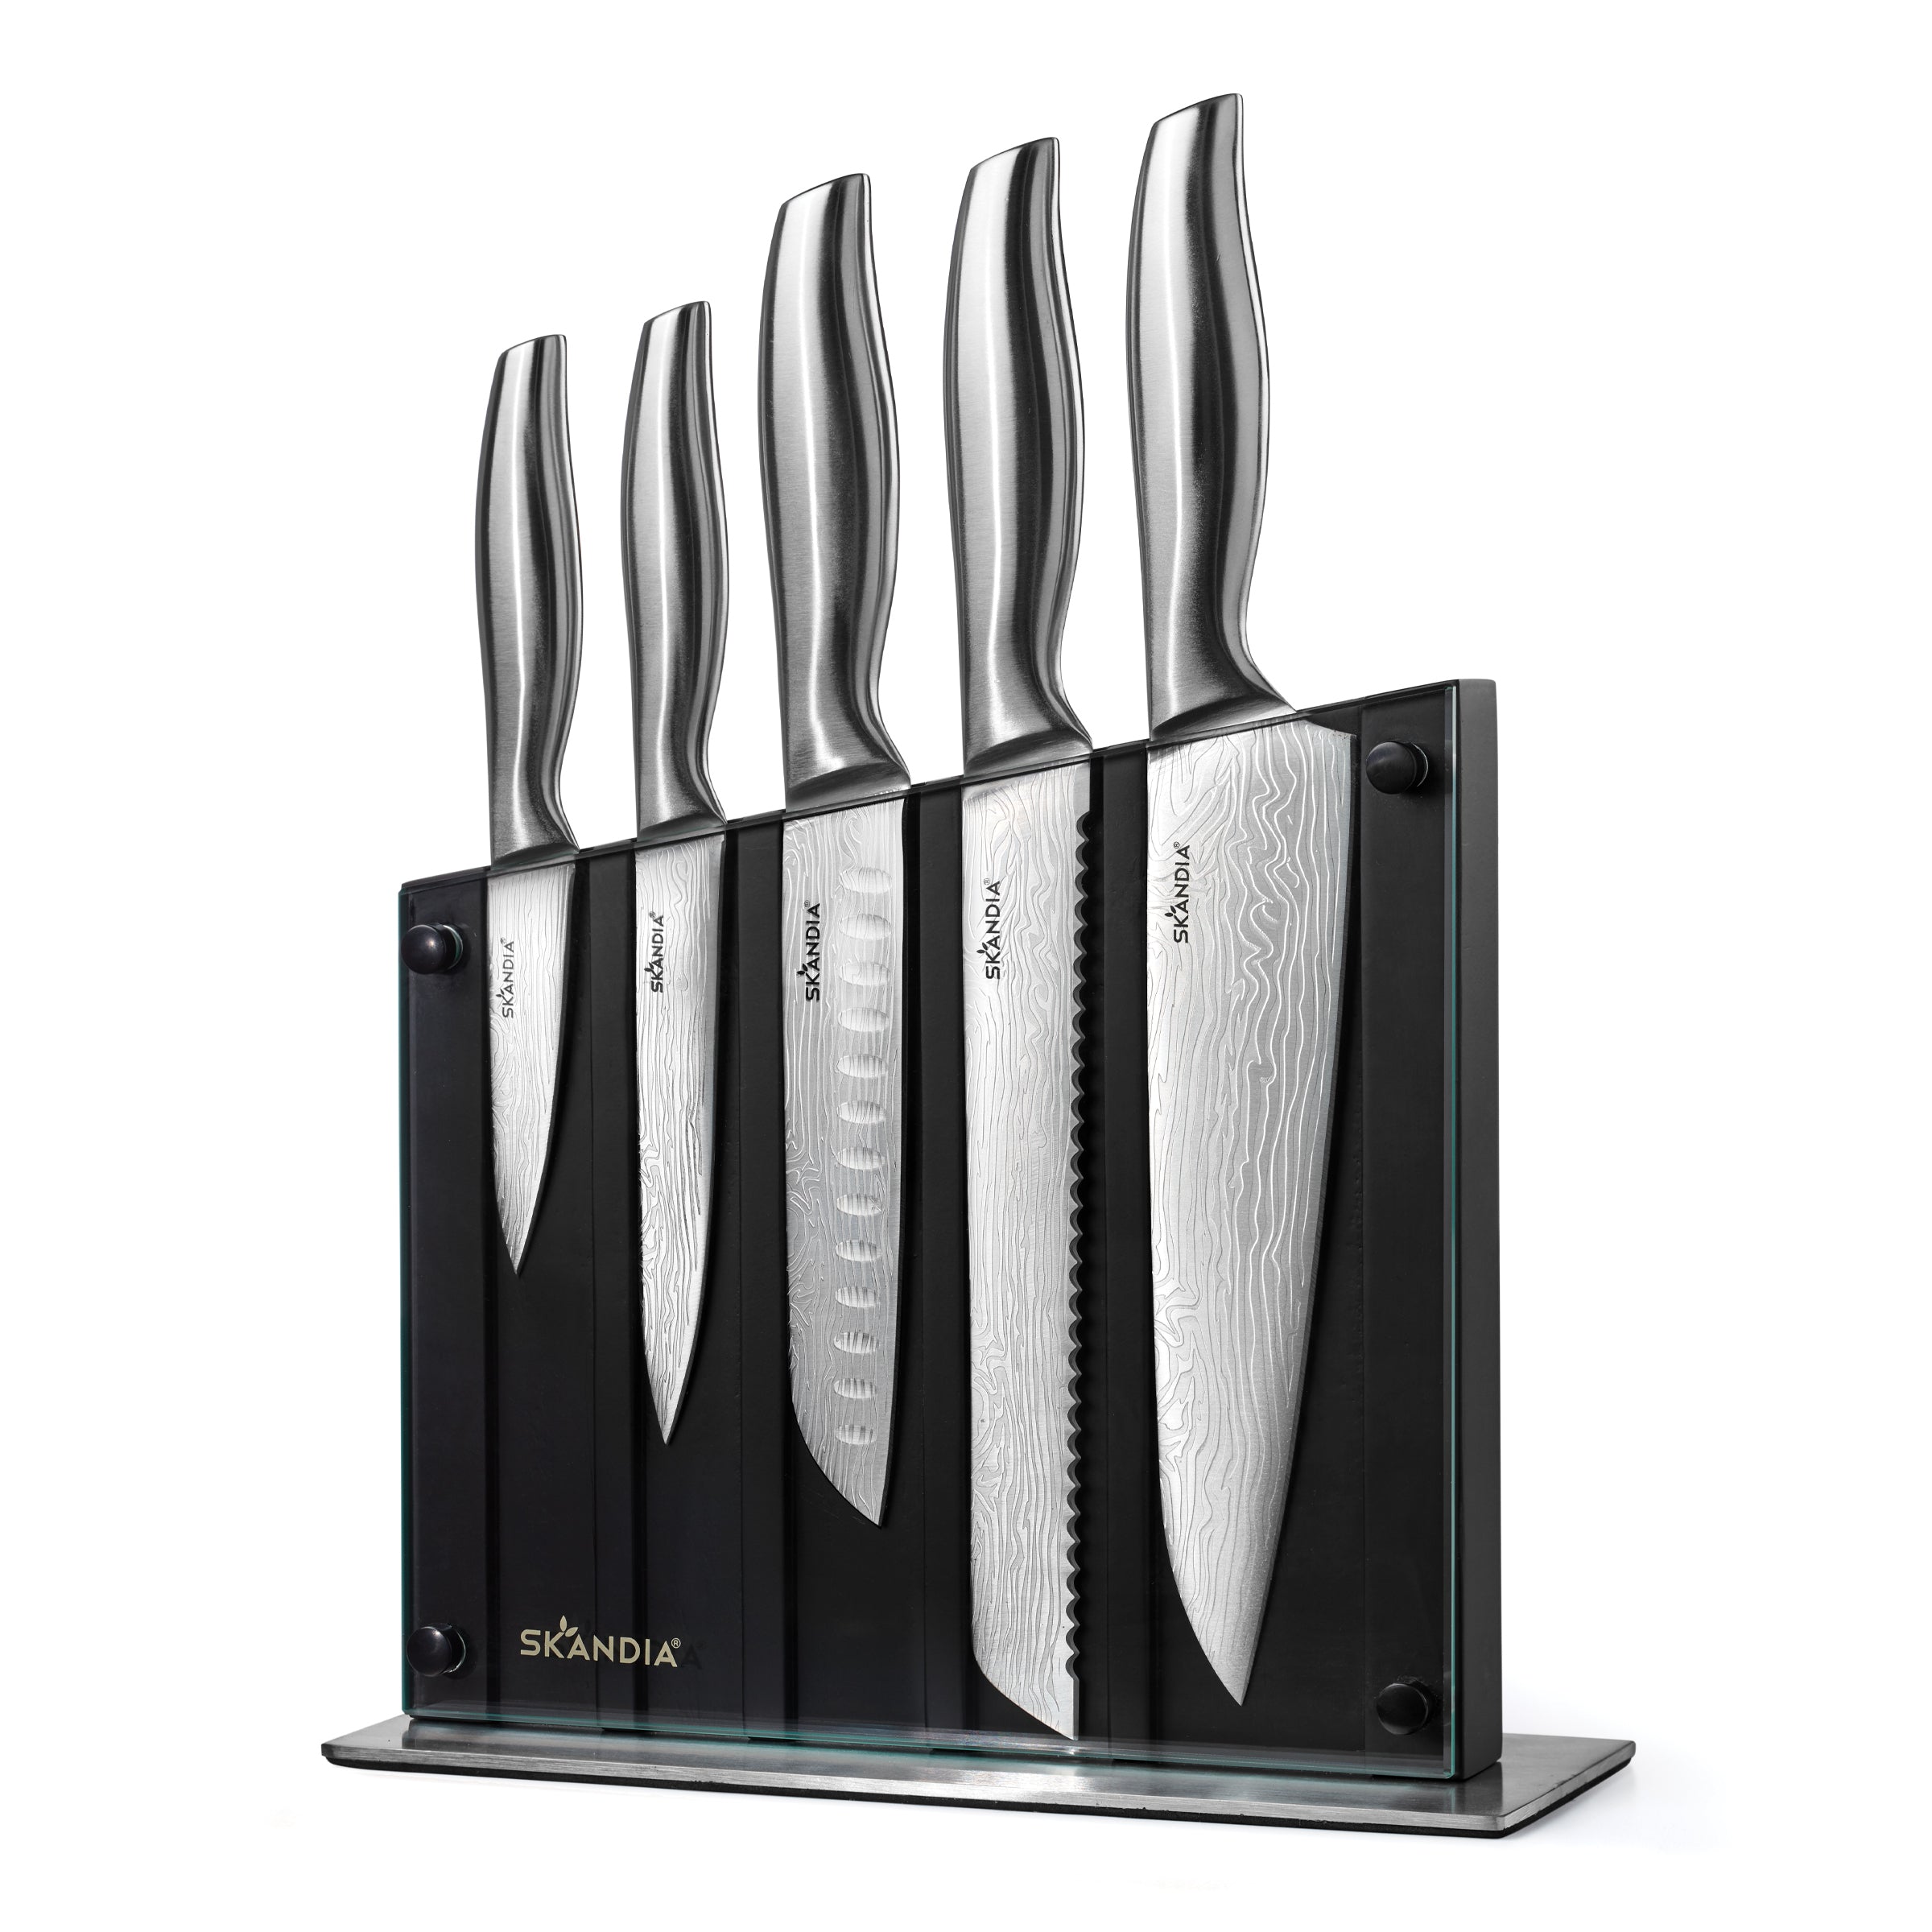 White and Gold Knife Set with Magnetic Knife Block